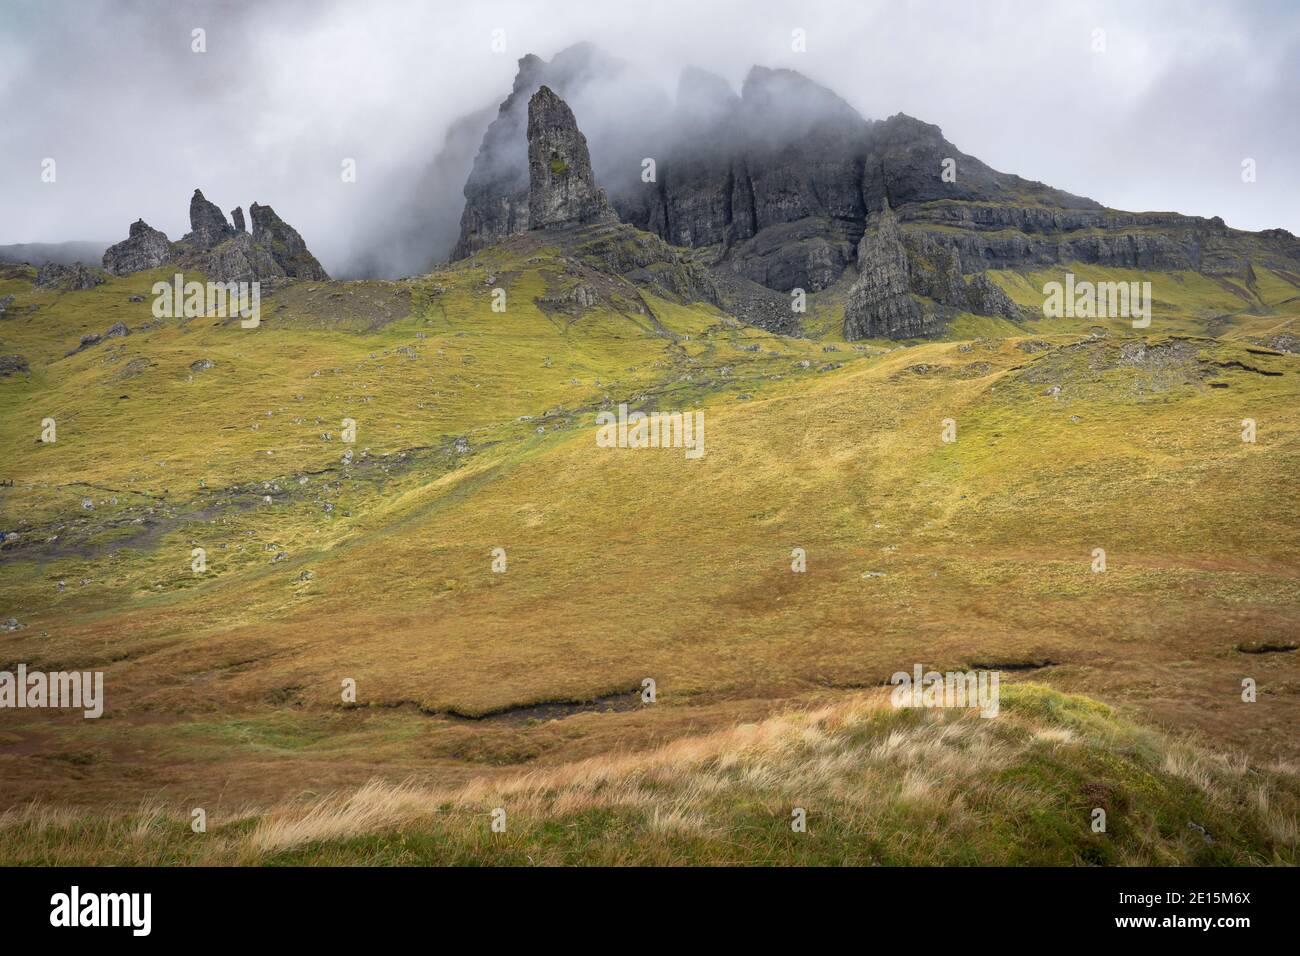 Isle of Skye, Scotland: Old Man of Storr. Peaks of the Totternish ridge, in a clearing storm Stock Photo